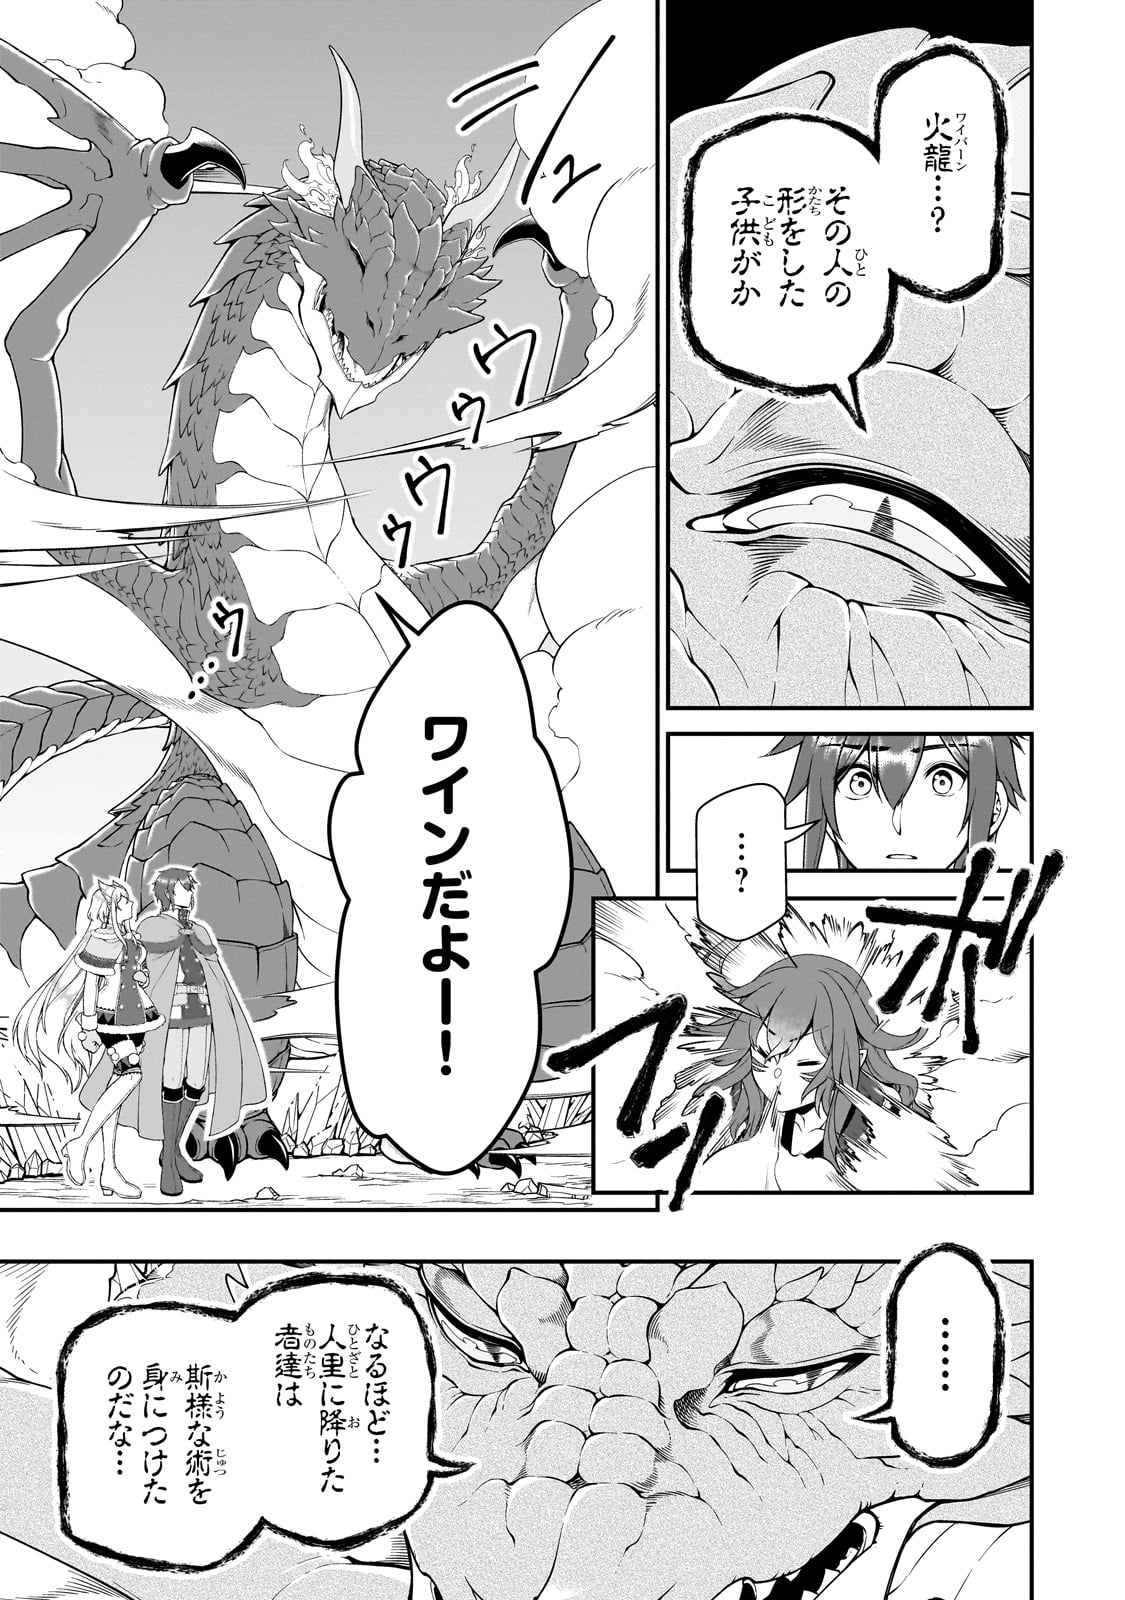 Ex-Hero Candidates, Who Turned Out To Be A Cheat From Lv2, Laid-back Life In Another World - Chapter 48 - Page 31